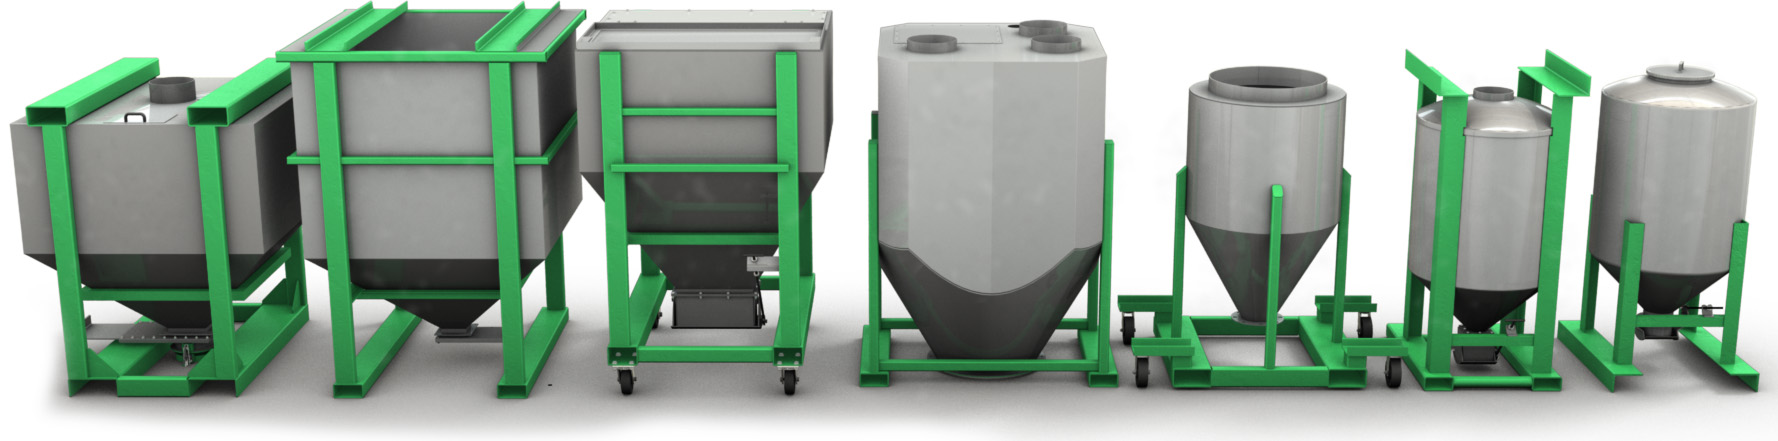 Square and Round Portable Bins Available